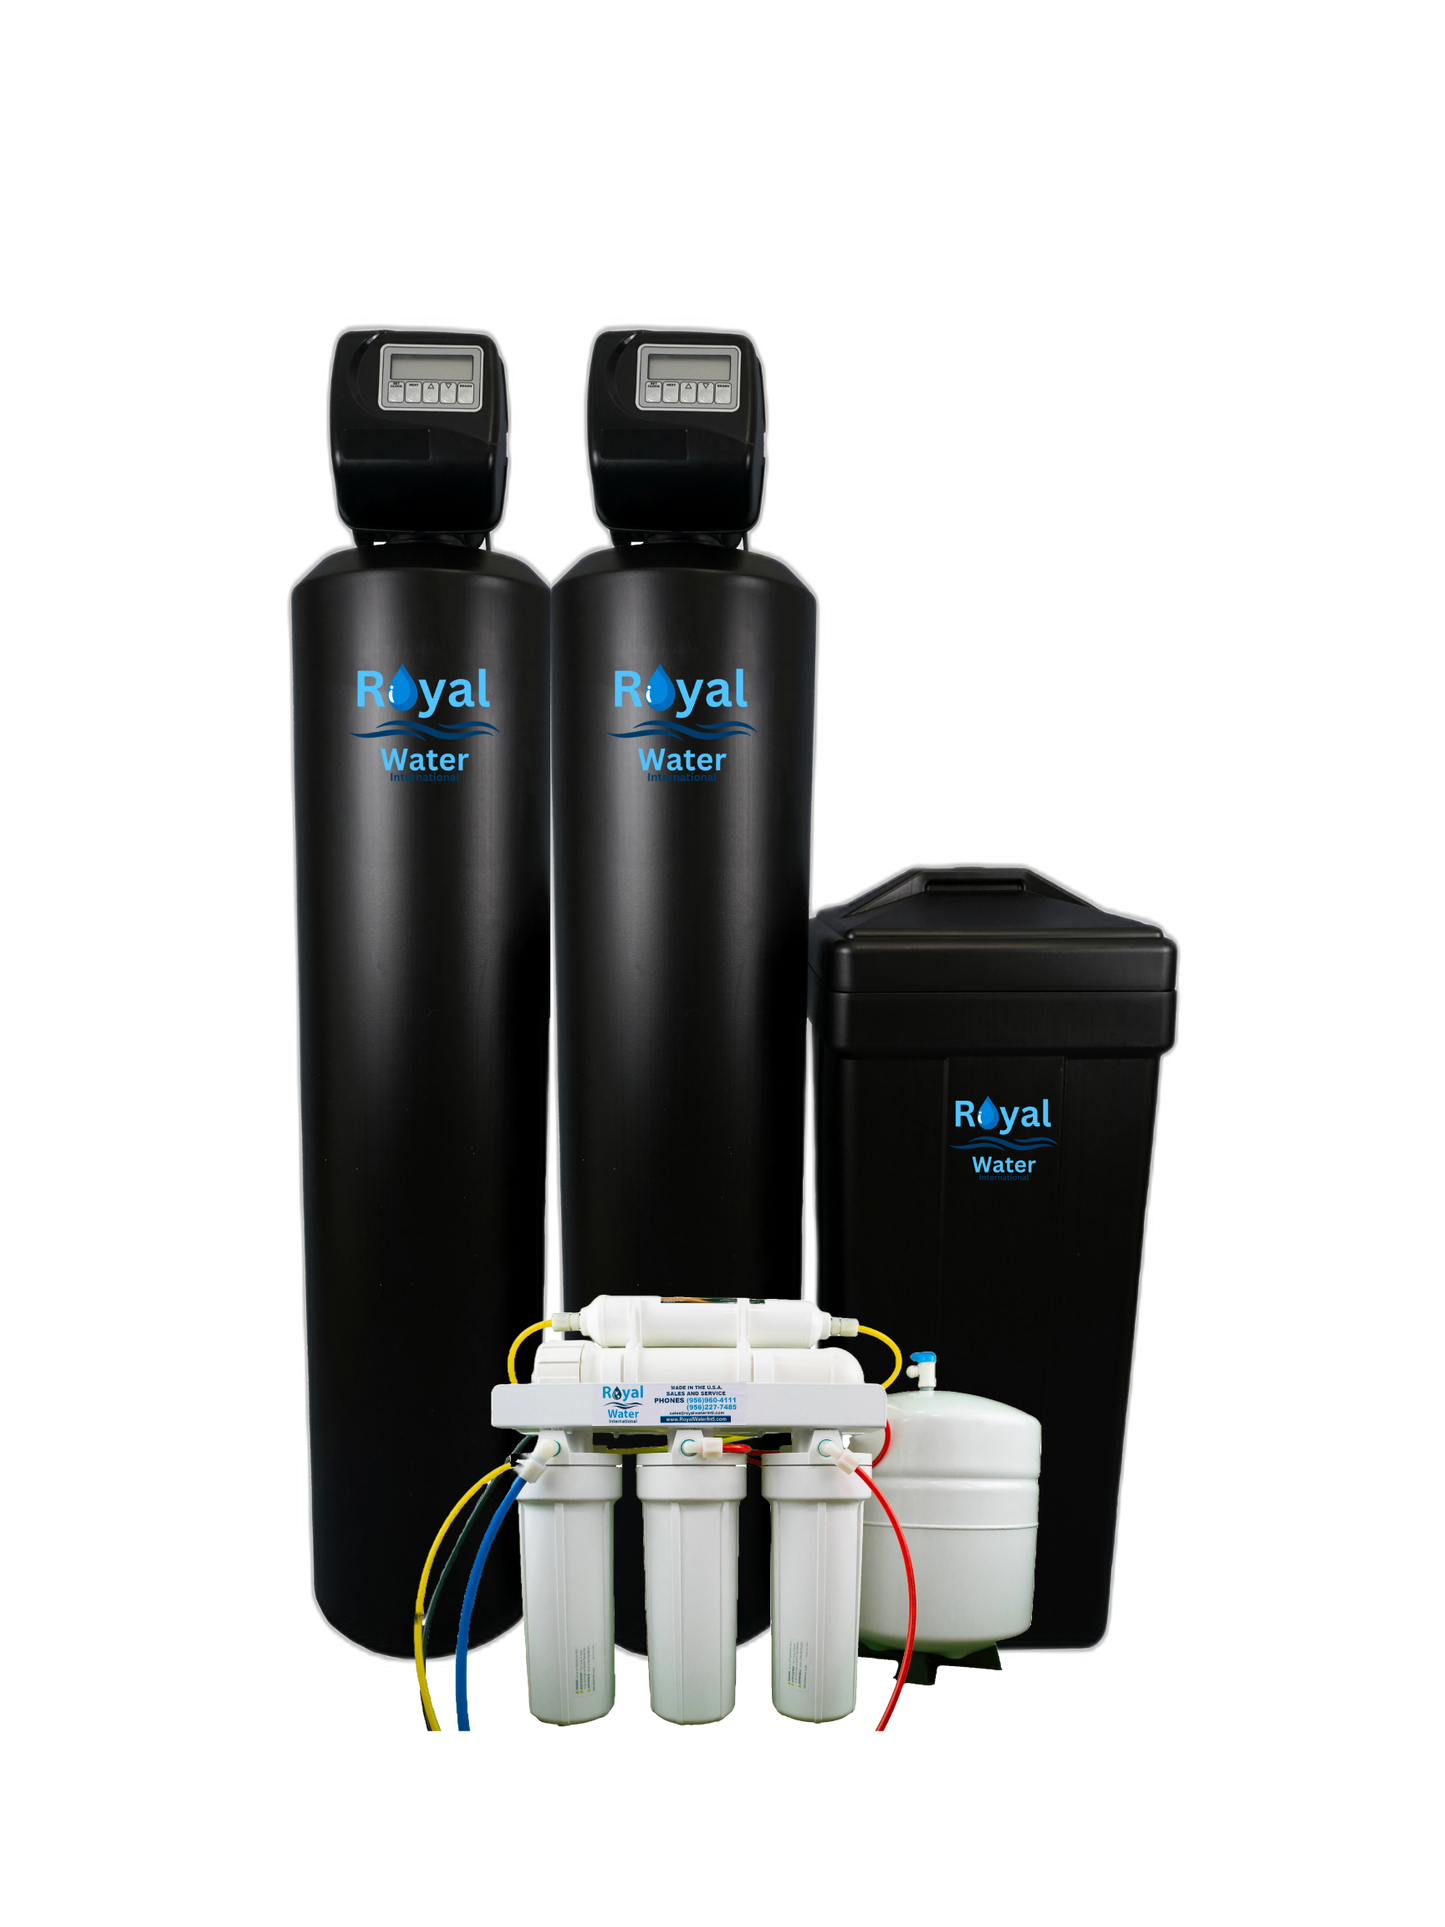 Royal Bundle: Whole Home Water Filtration System